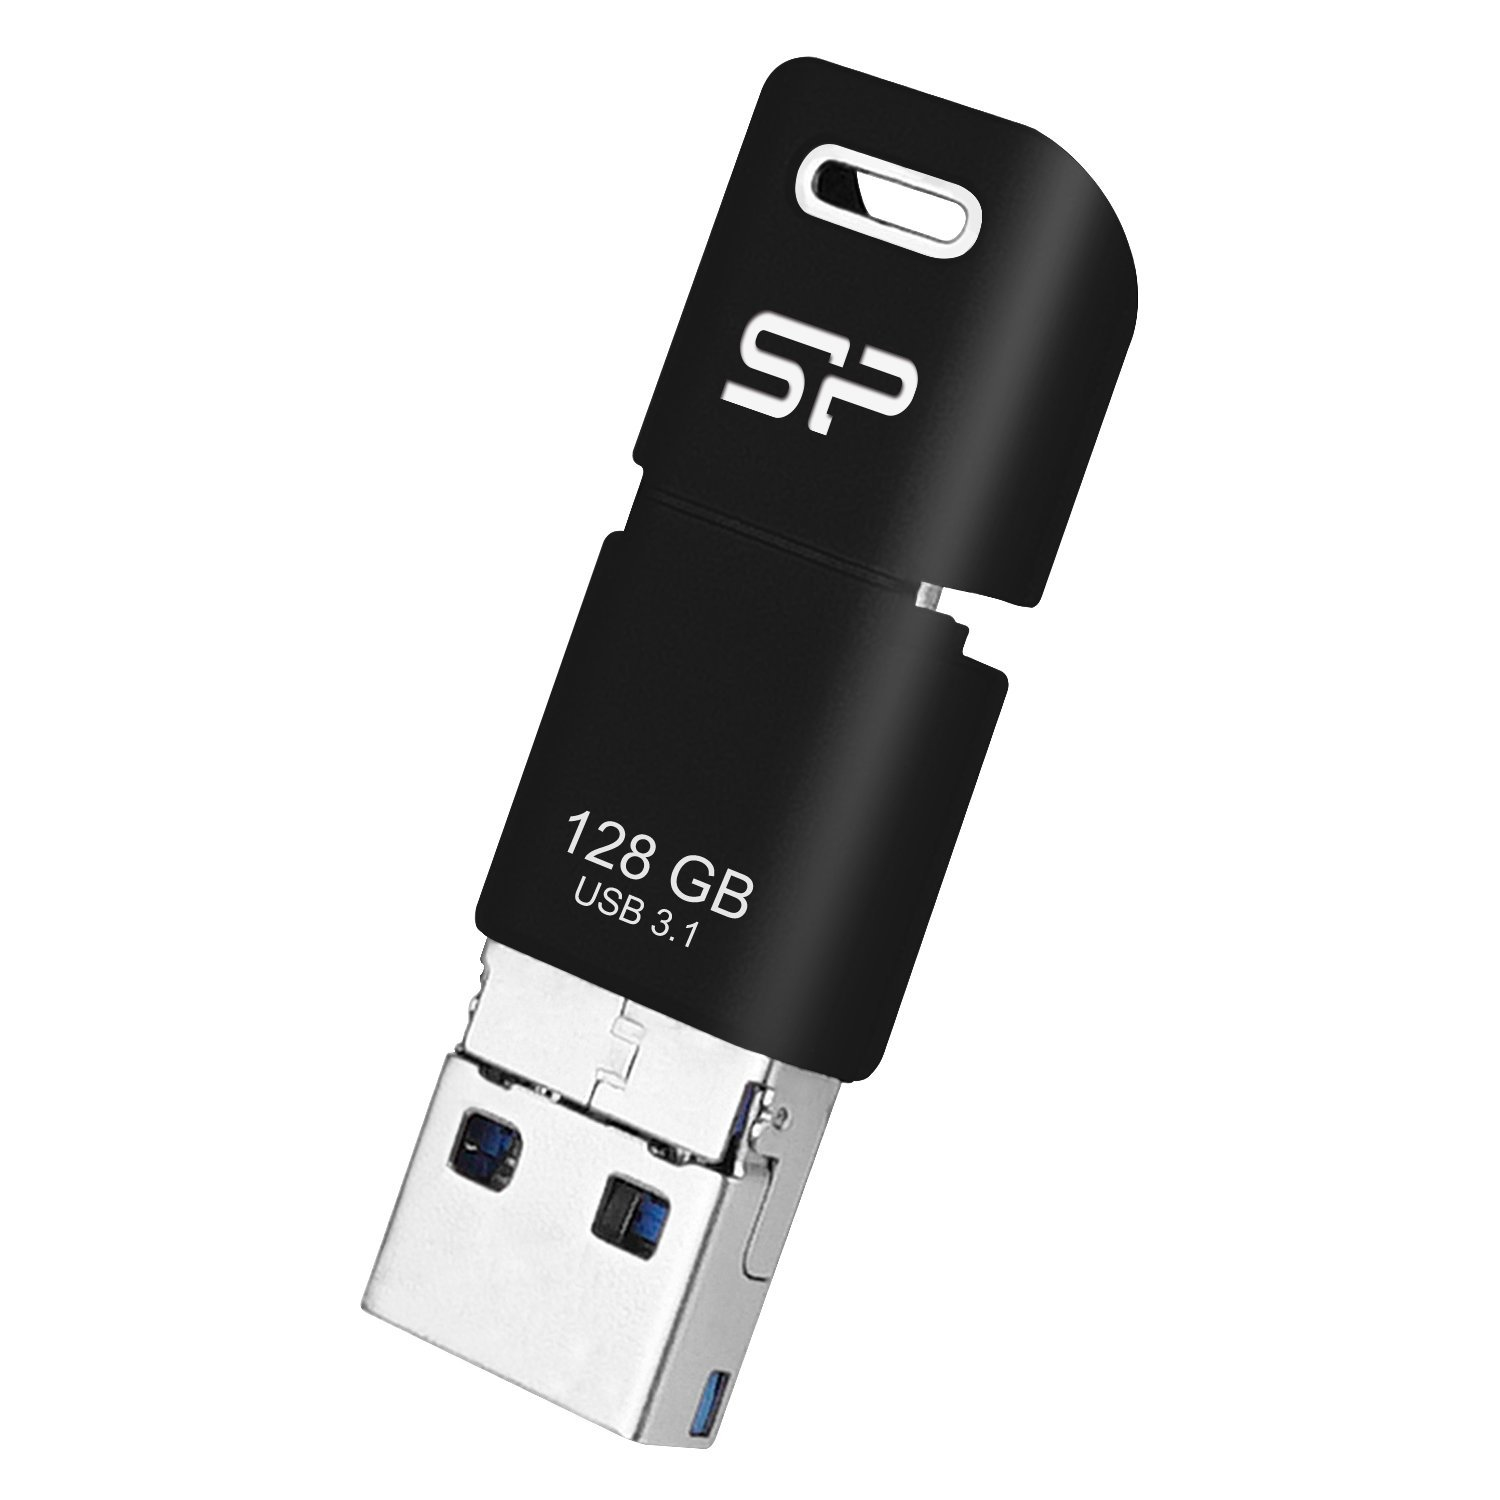 The Silicon Power 128GB MicroSD Card, Linux, and the PSP